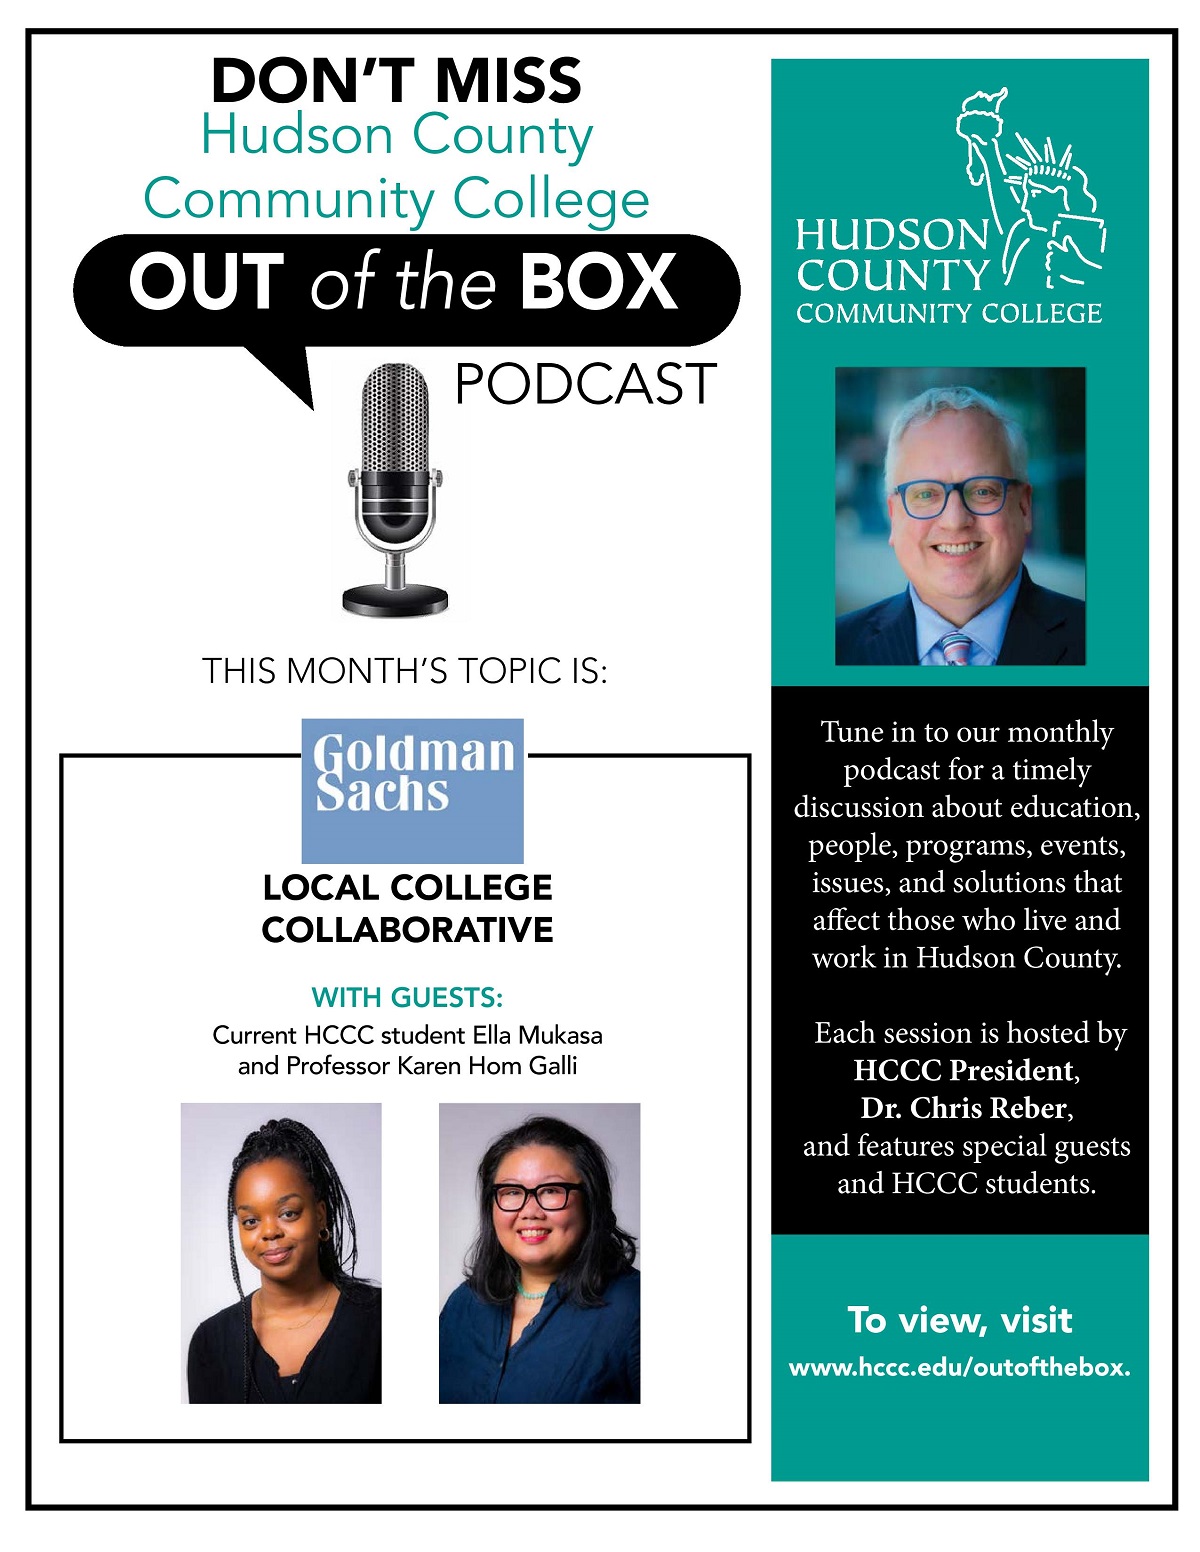 Out of the Box - Goldman Sachs Local College Collaborative